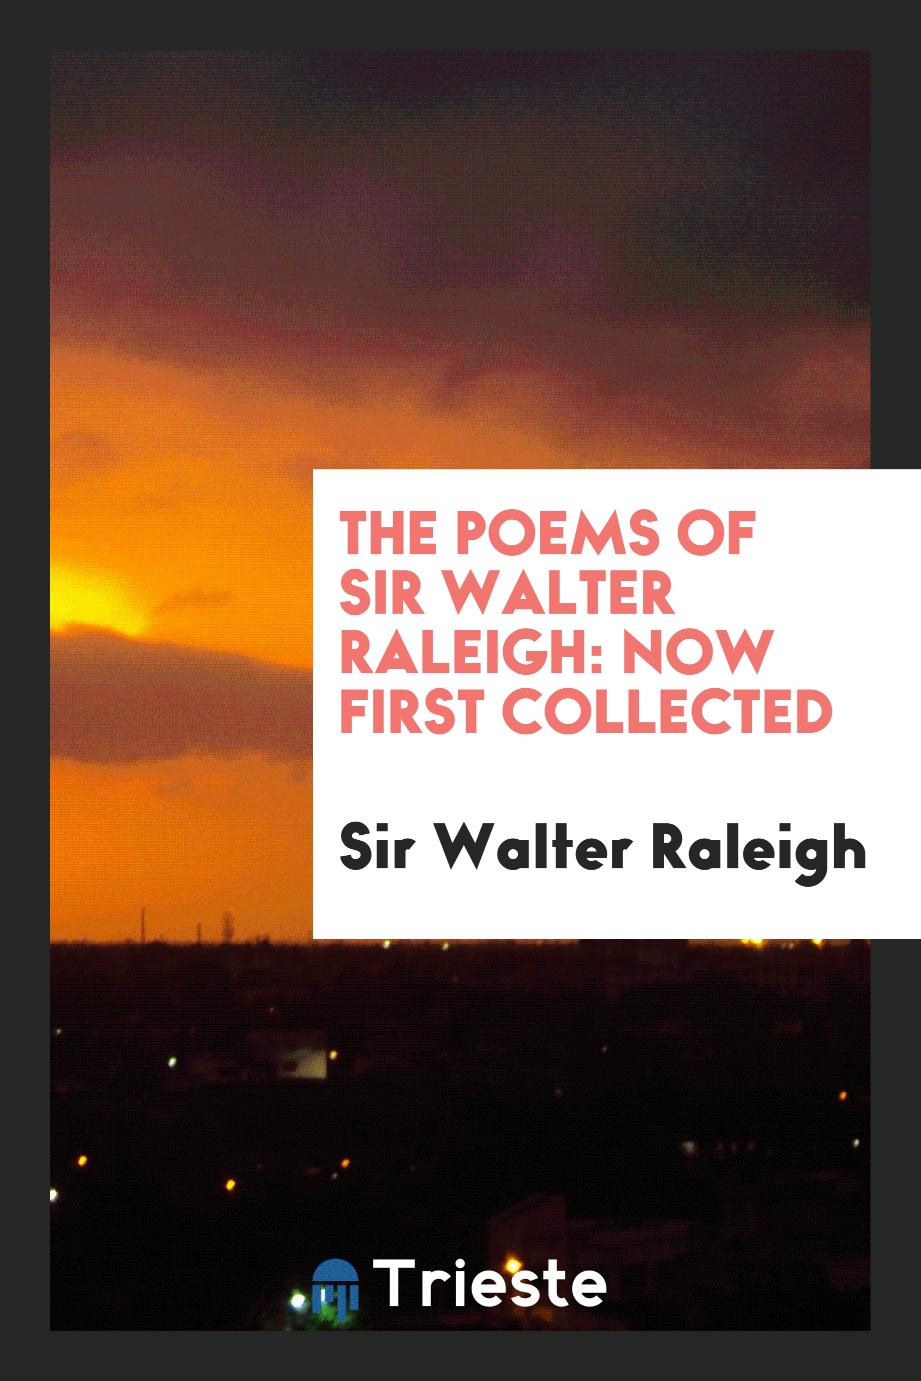 The poems of Sir Walter Raleigh: now first collected